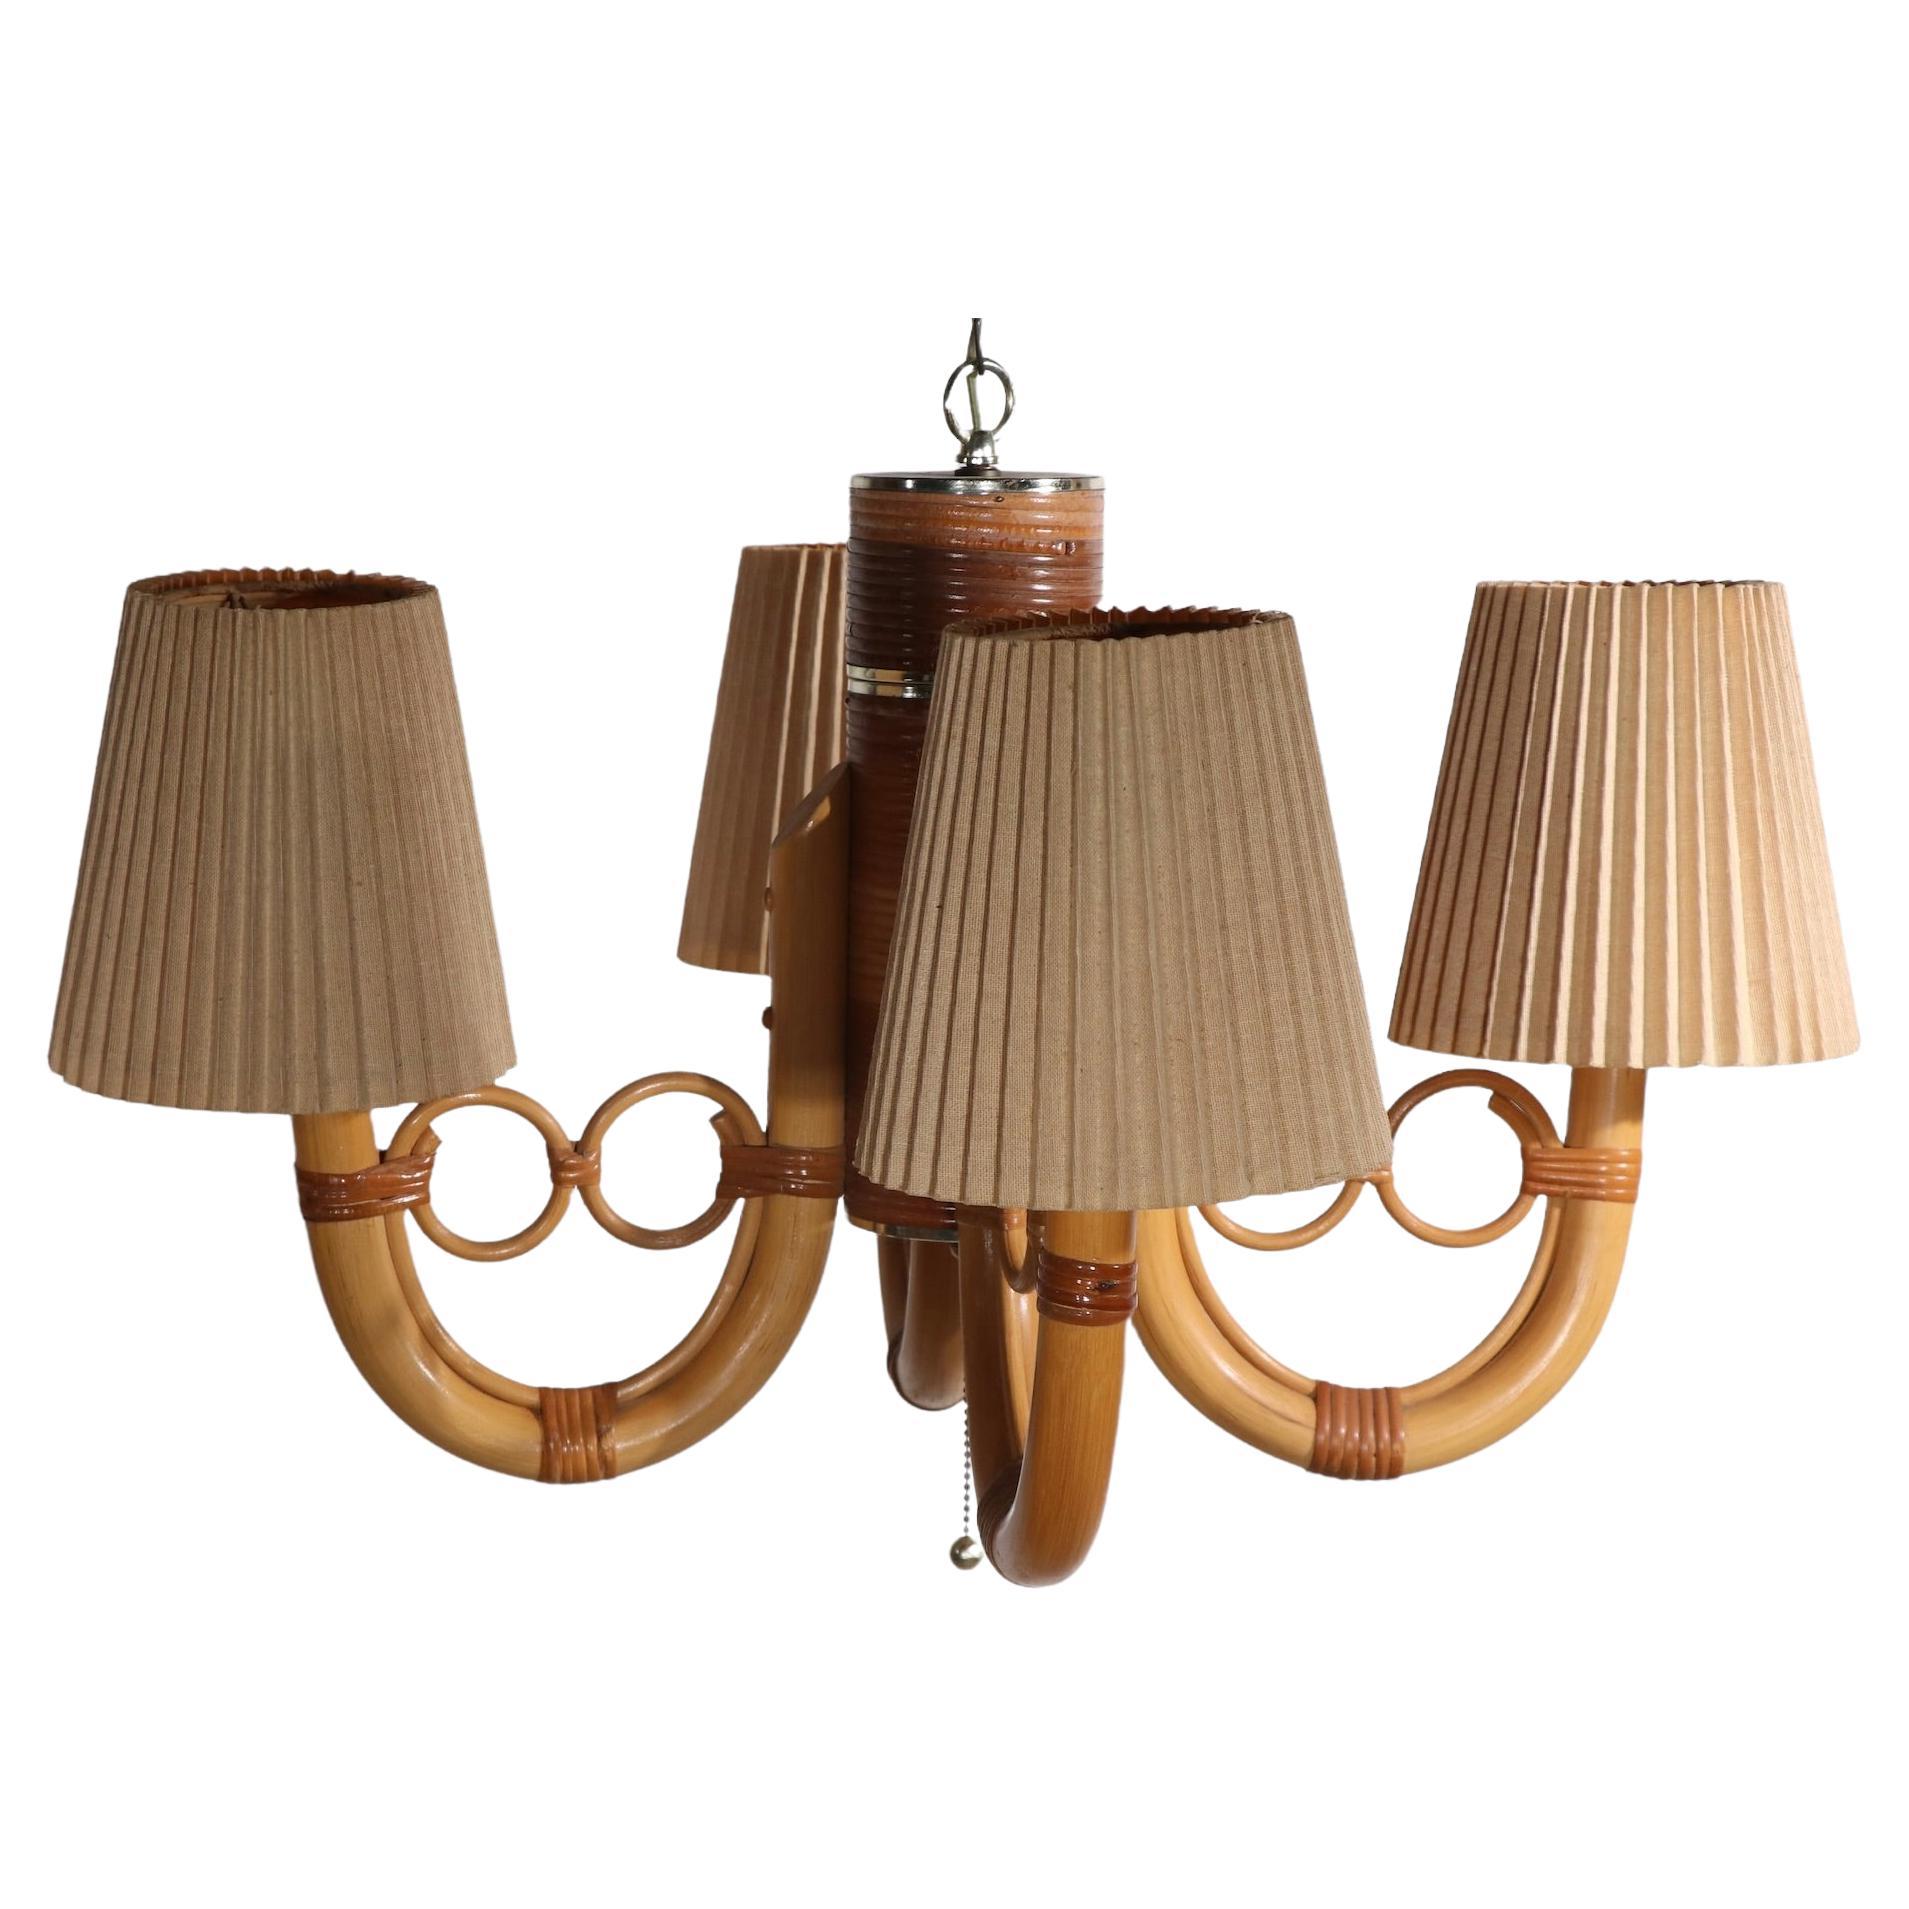 Mod Style Four Arm Bamboo Chandelier by Maxim Lighting Los Angeles, Ca. 1970's For Sale